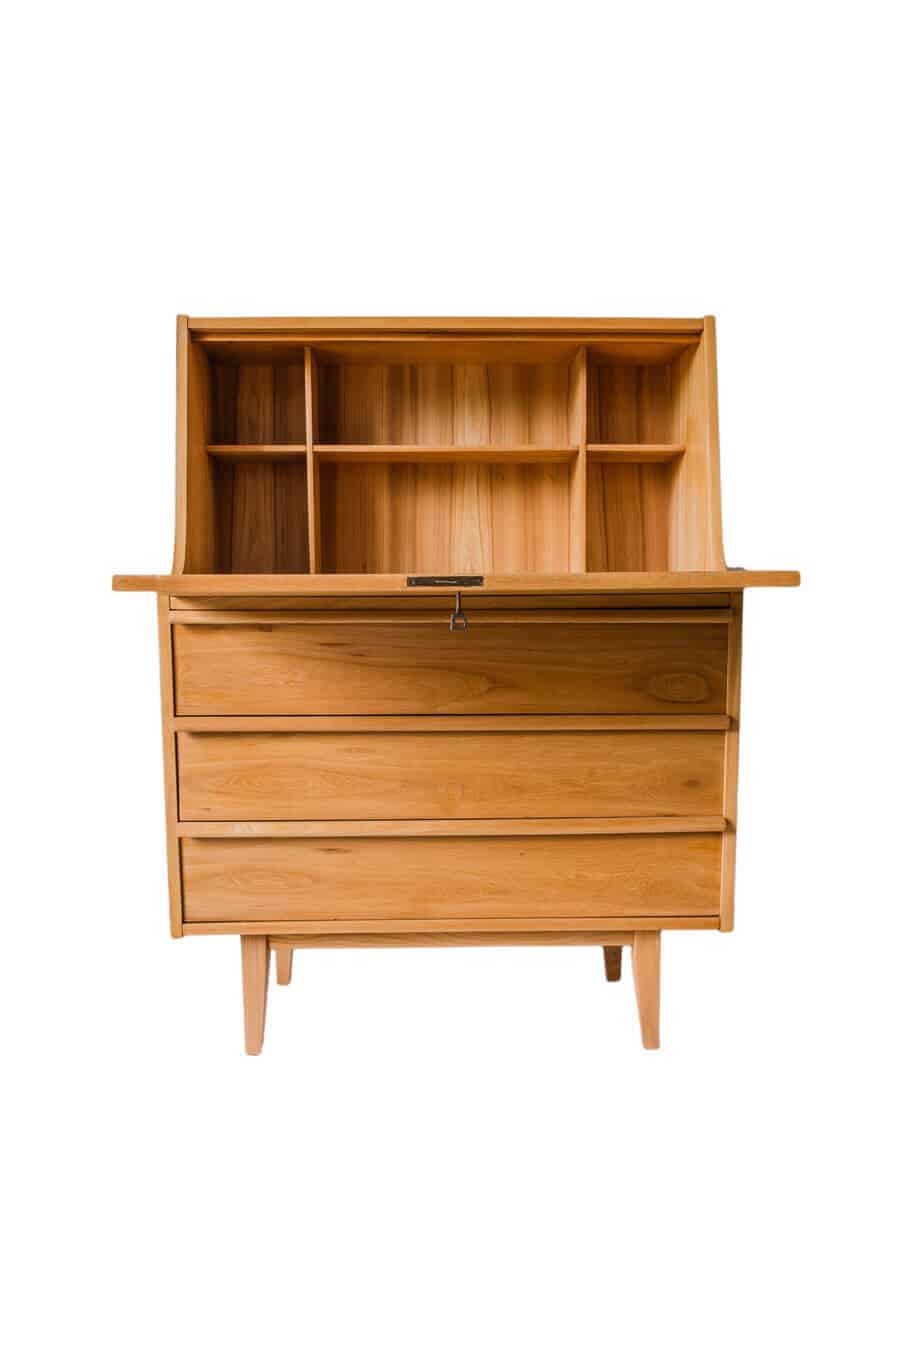 Cabinet designed by H. Lachert for ŁAD Cooperative